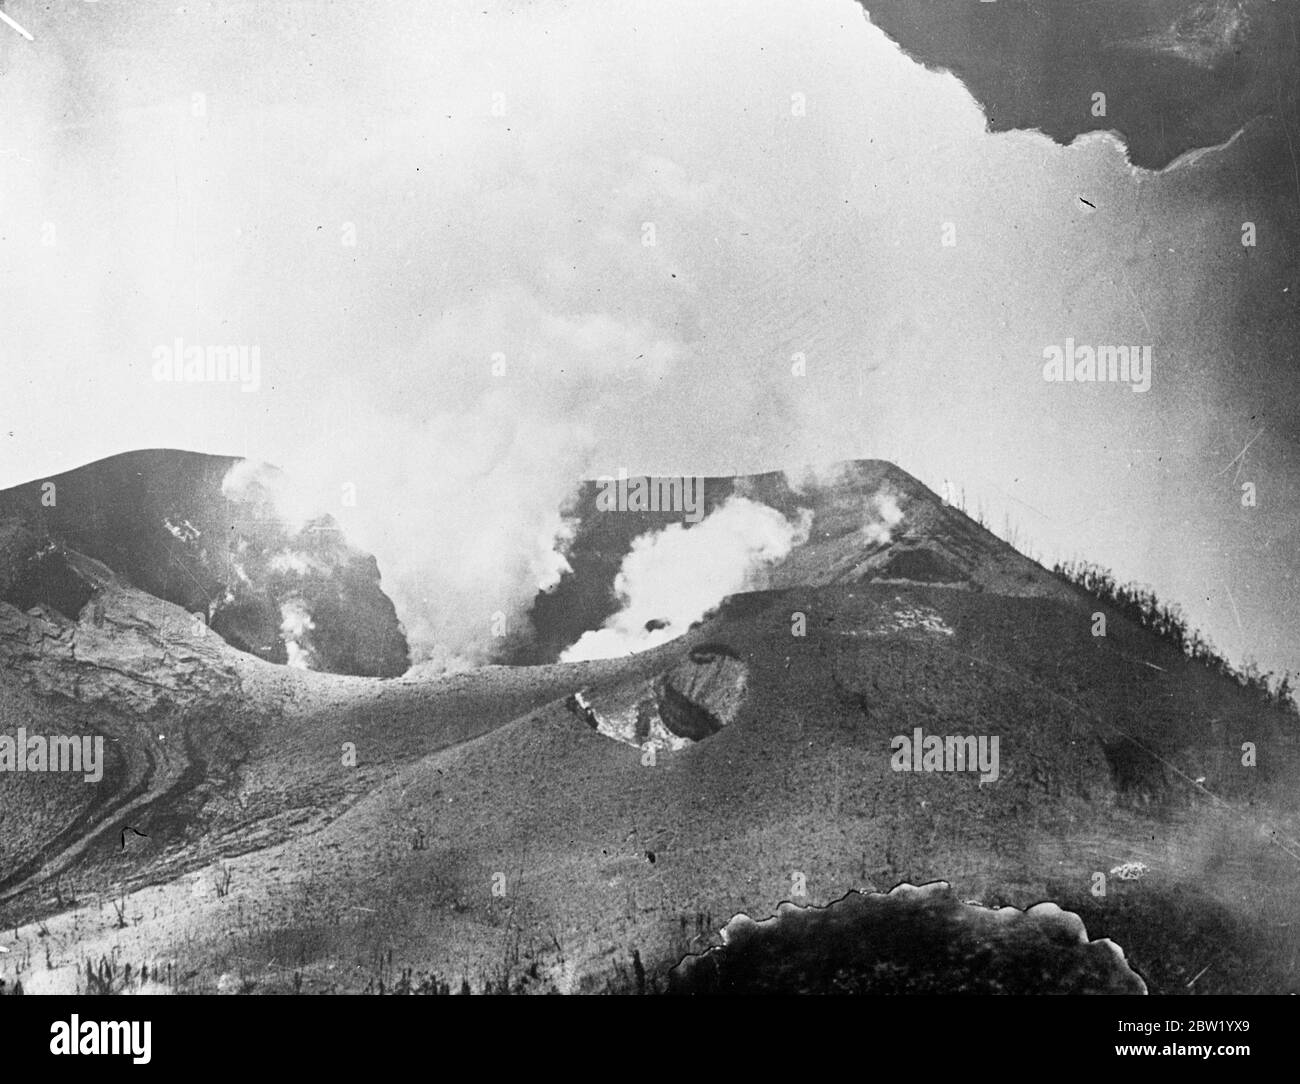 Smoke and volcanic mud pouring from the crater on Matupi Island. First pictures of volcano disaster on New Guinea islands. Three volcanoes, 2 on Vulcan Island and one on the Matupi Island, erupted violently showering pumice and mud on the roofs of Rabaul chief town of New Britain Island in New Guinea. A state of emergency was declared. 18 June 1937 Stock Photo